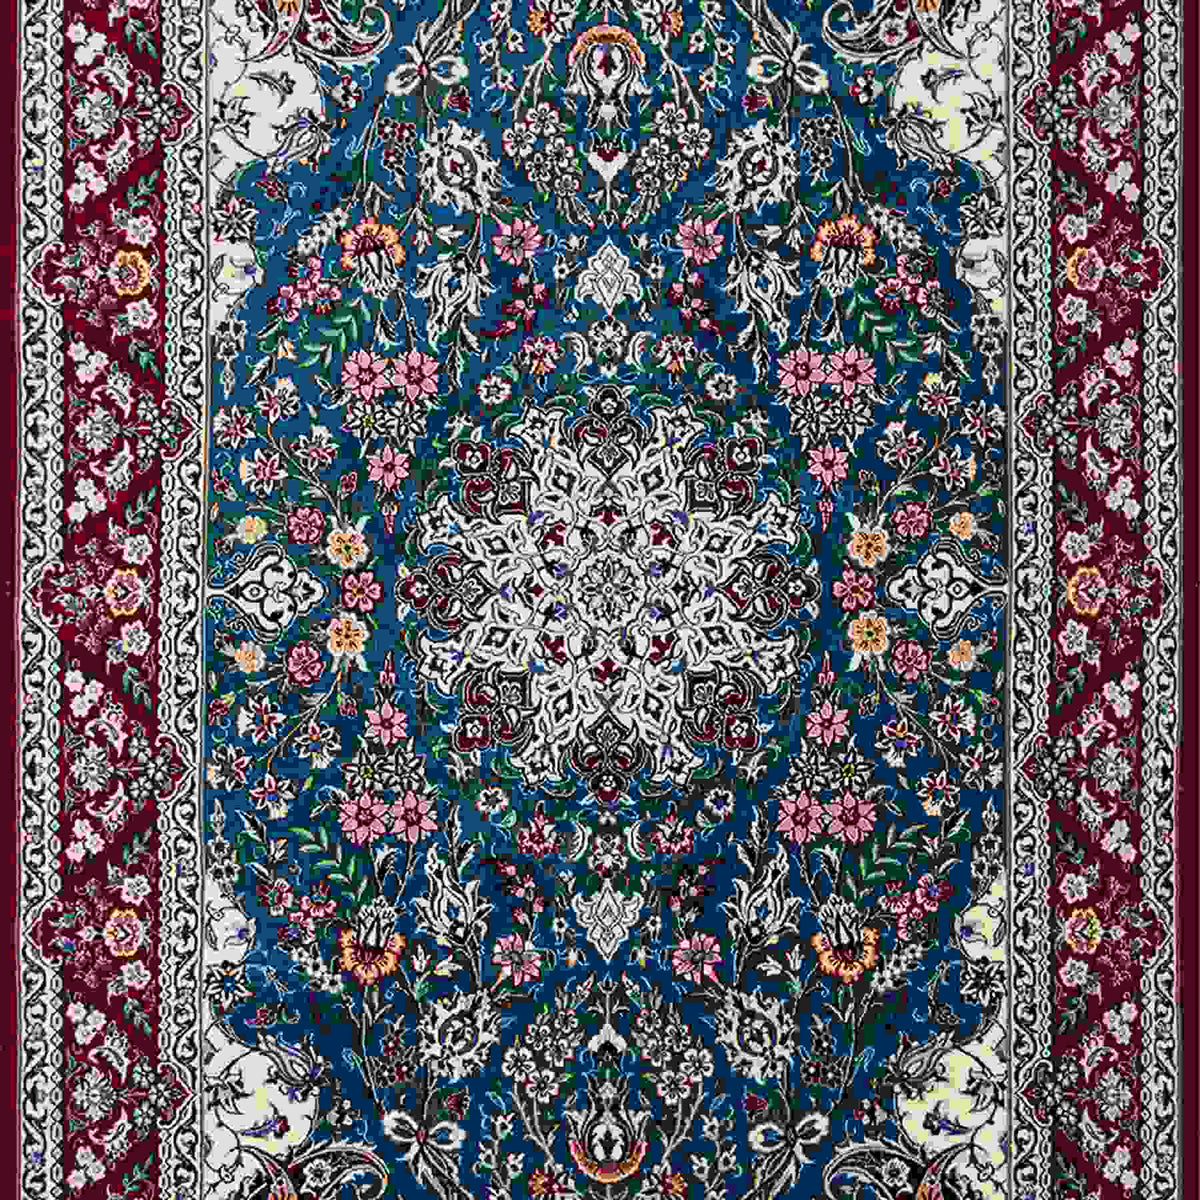 Super Fine Wool &amp; Silk Nain Persian Rug (SIGNED BY MASTER WEAVER)